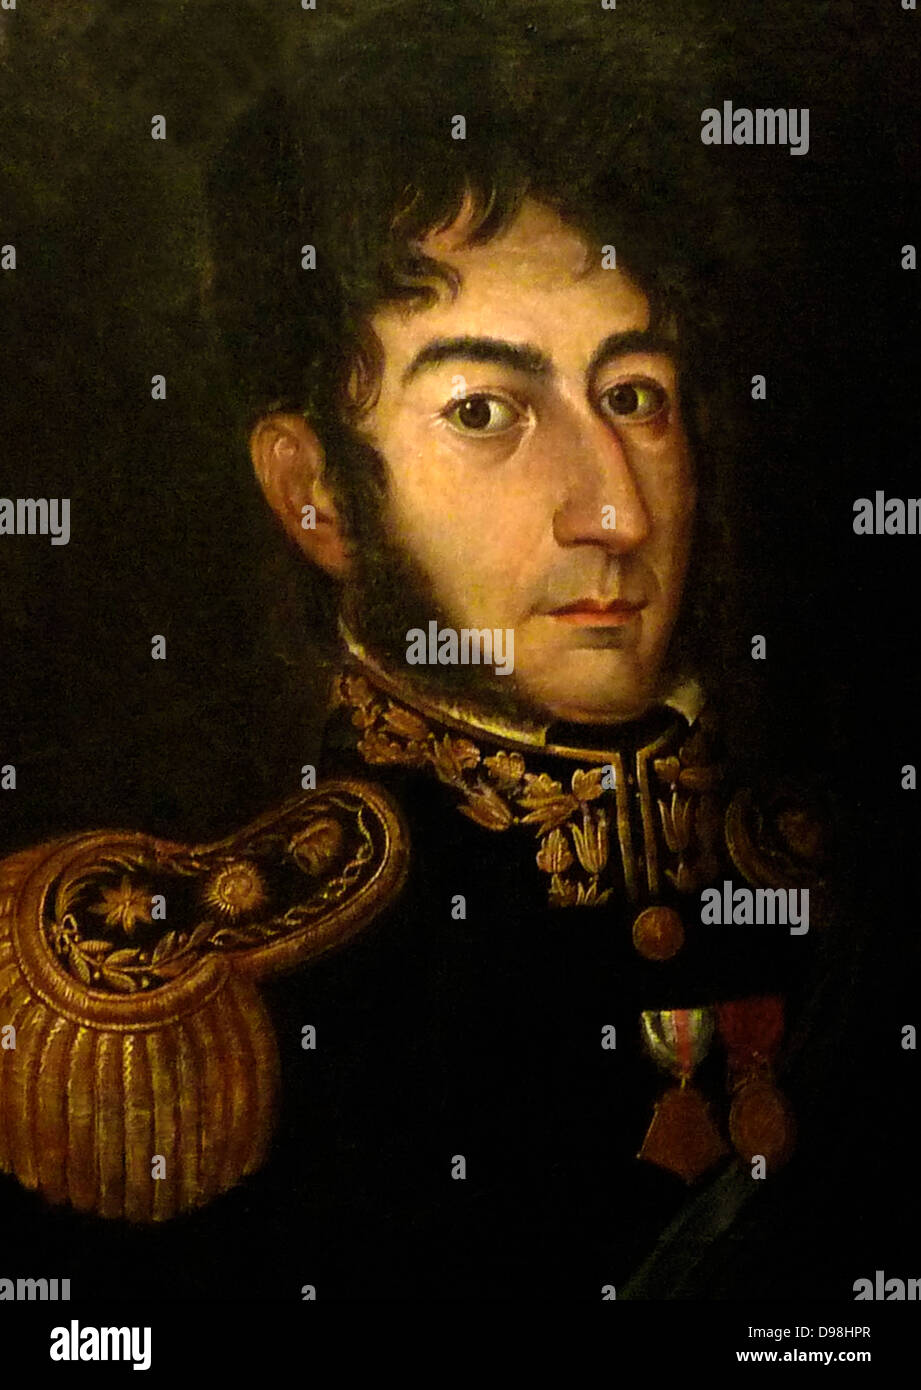 Portrait of General Jose de San Martin (1821) by José Gil de Castro. José Francisco de San Martín, known simply as Don José de San Martín (c. 1778 – 17 August 1850), was an Argentine general and the prime leader of the southern part of South America's successful struggle for independence from Spain. Stock Photo